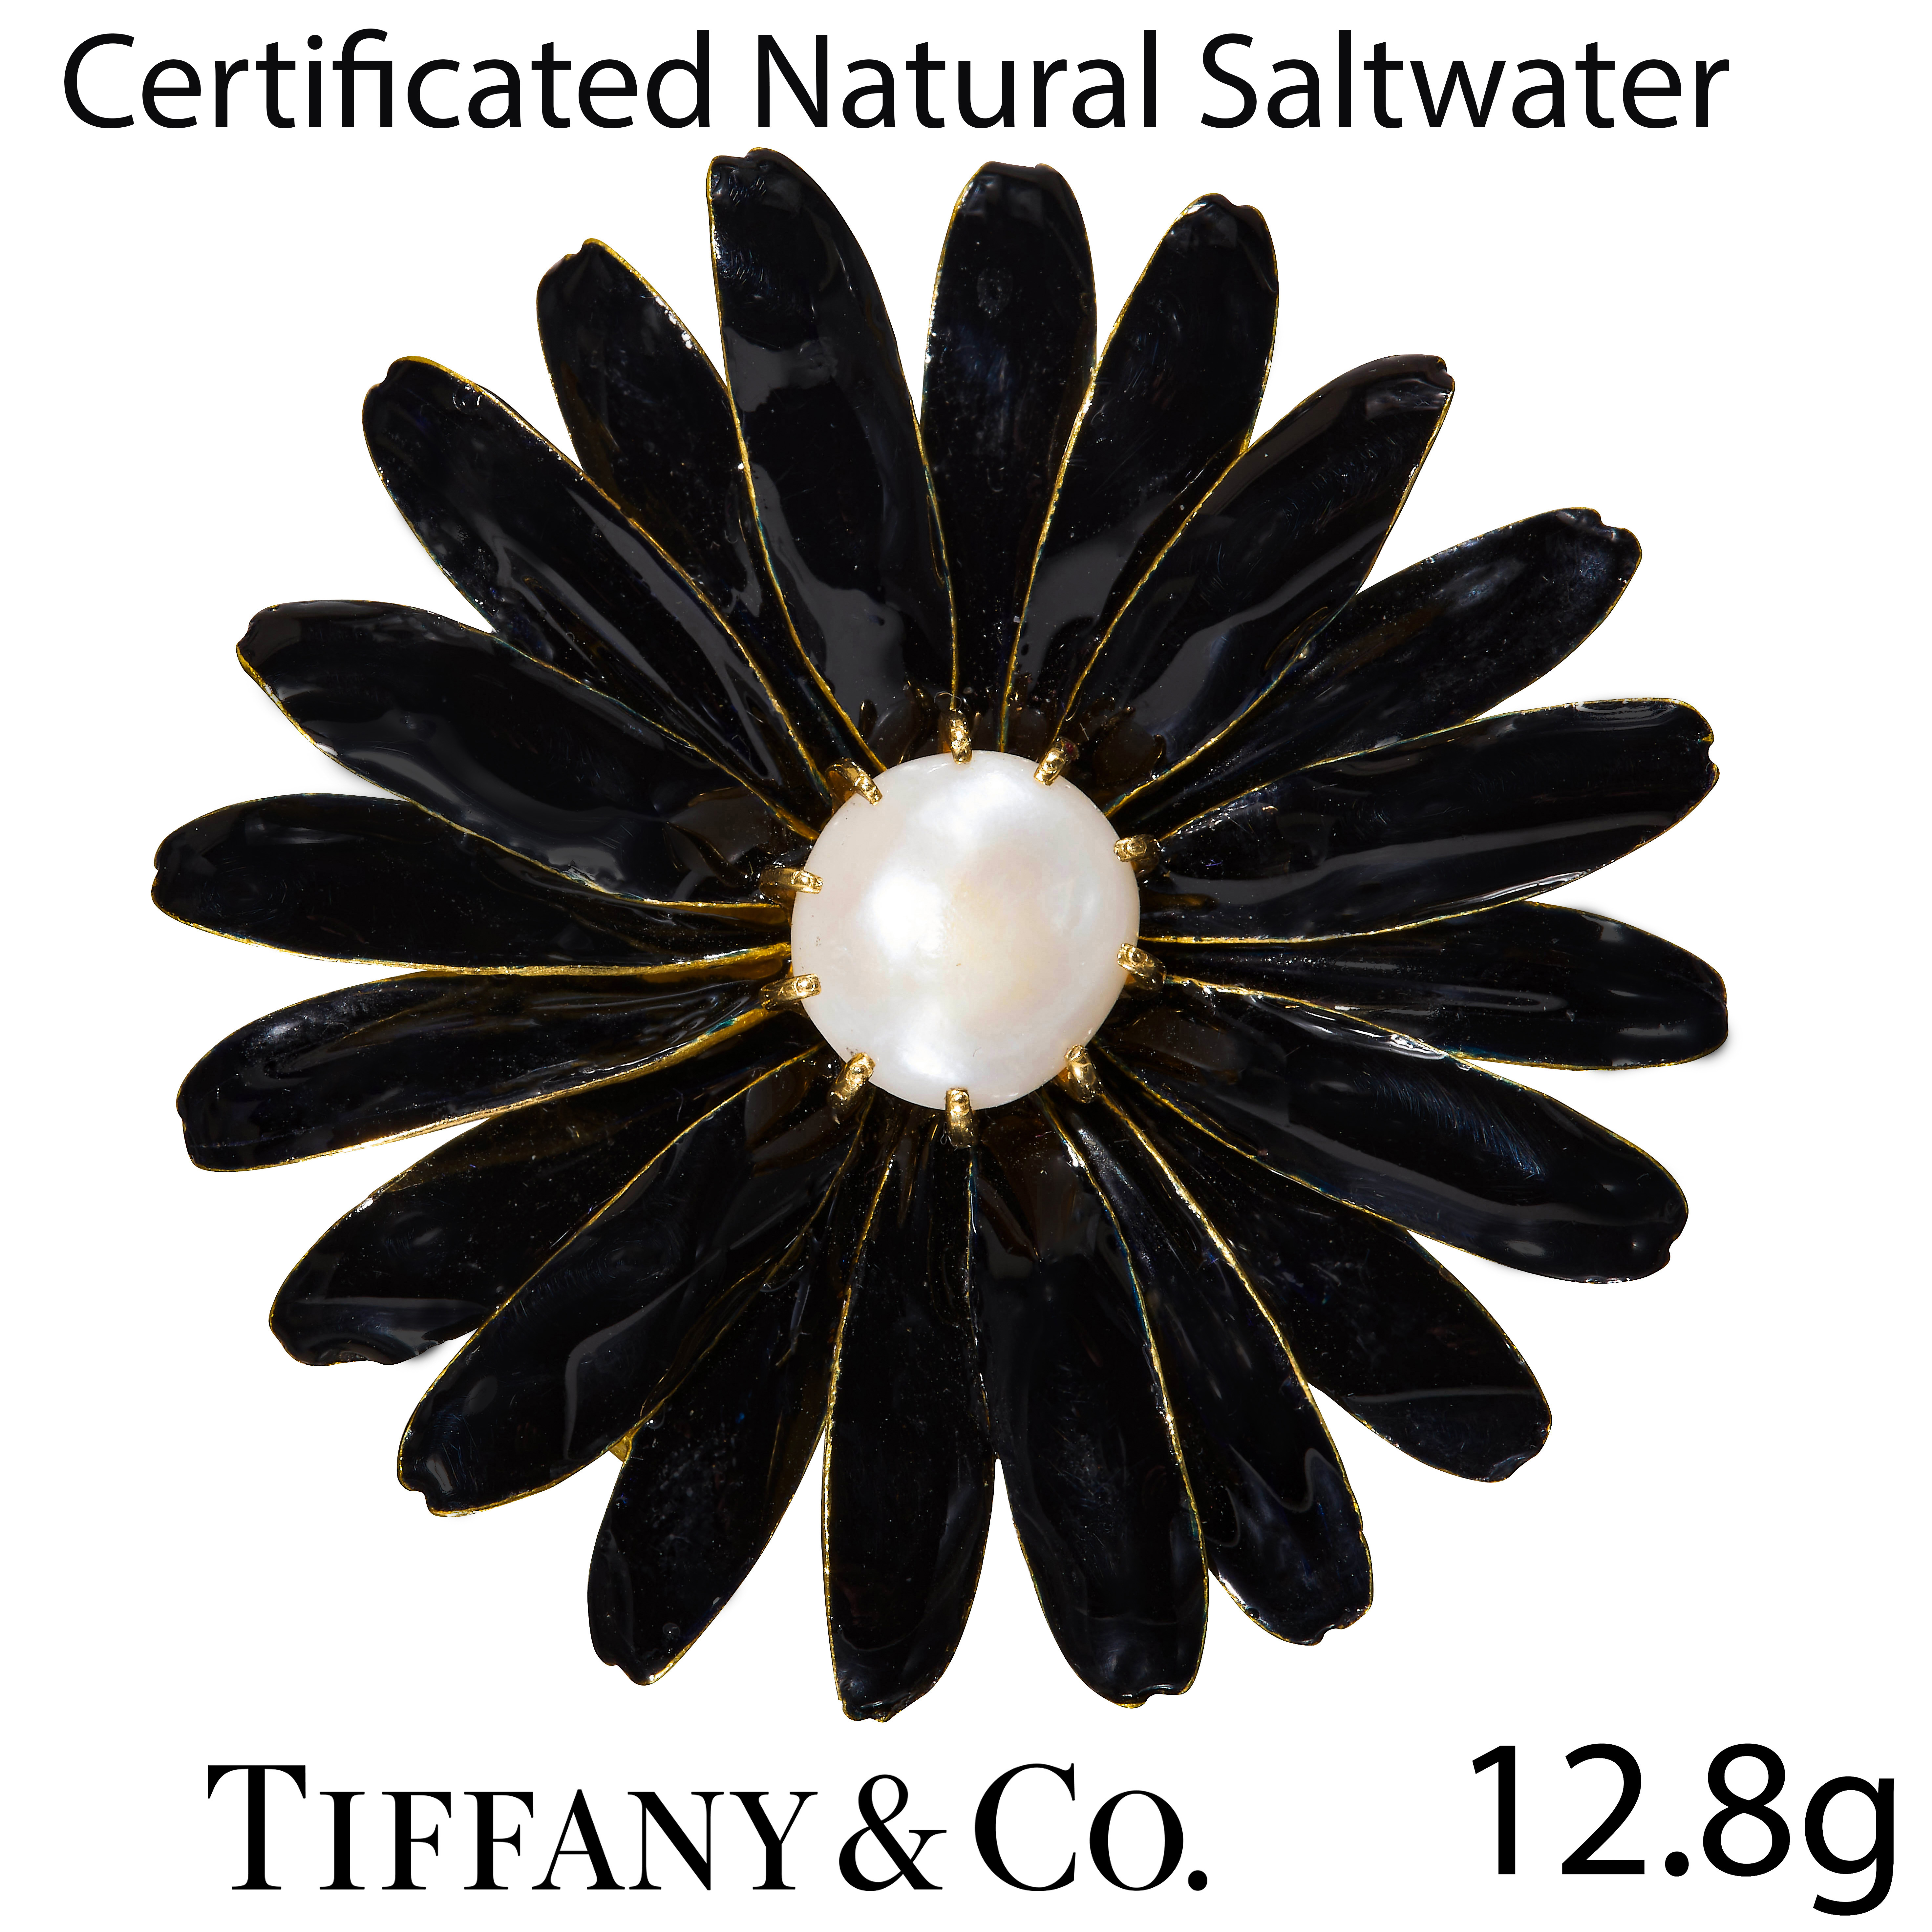 TIFFANY AND CO, ANTIQUE, CA. 1900, MOST LIKELY LOUIS COMFORT TIFFANY, CERTIFICATED NATURAL SALTWATER - Image 2 of 4